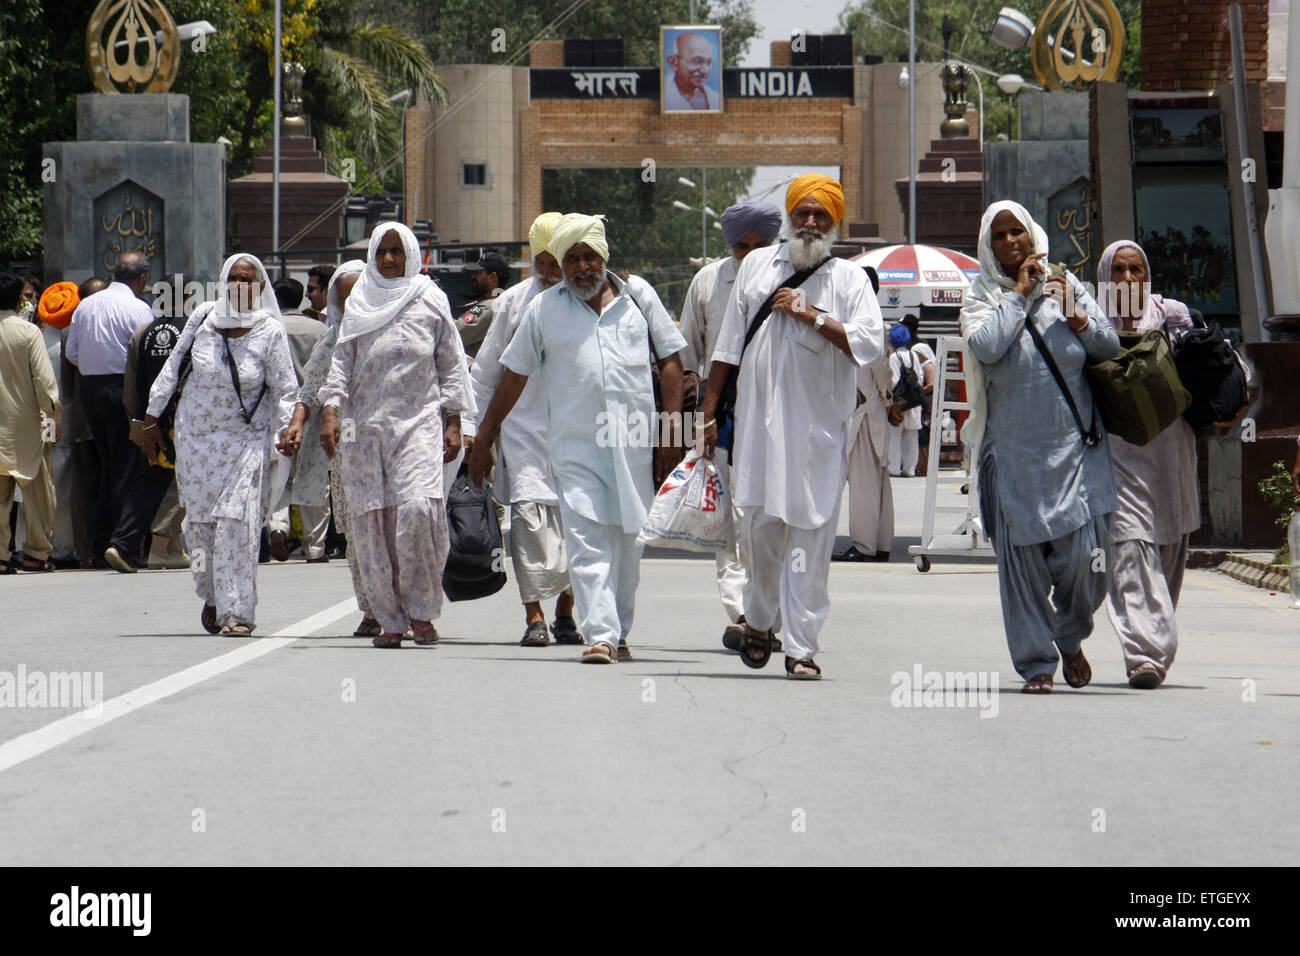 Lahore. 13th June, 2015. Indian Sikh pilgrims cross the Wagha border post in eastern Pakistan's Lahore on June 13, 2015. Hundreds of Sikh pilgrims arrived in Pakistan on Saturday to attend ceremonies marking the death of the fifth Sikh Guru, Arjan Dev Ji. © Jamil Ahmed/Xinhua/Alamy Live News Stock Photo